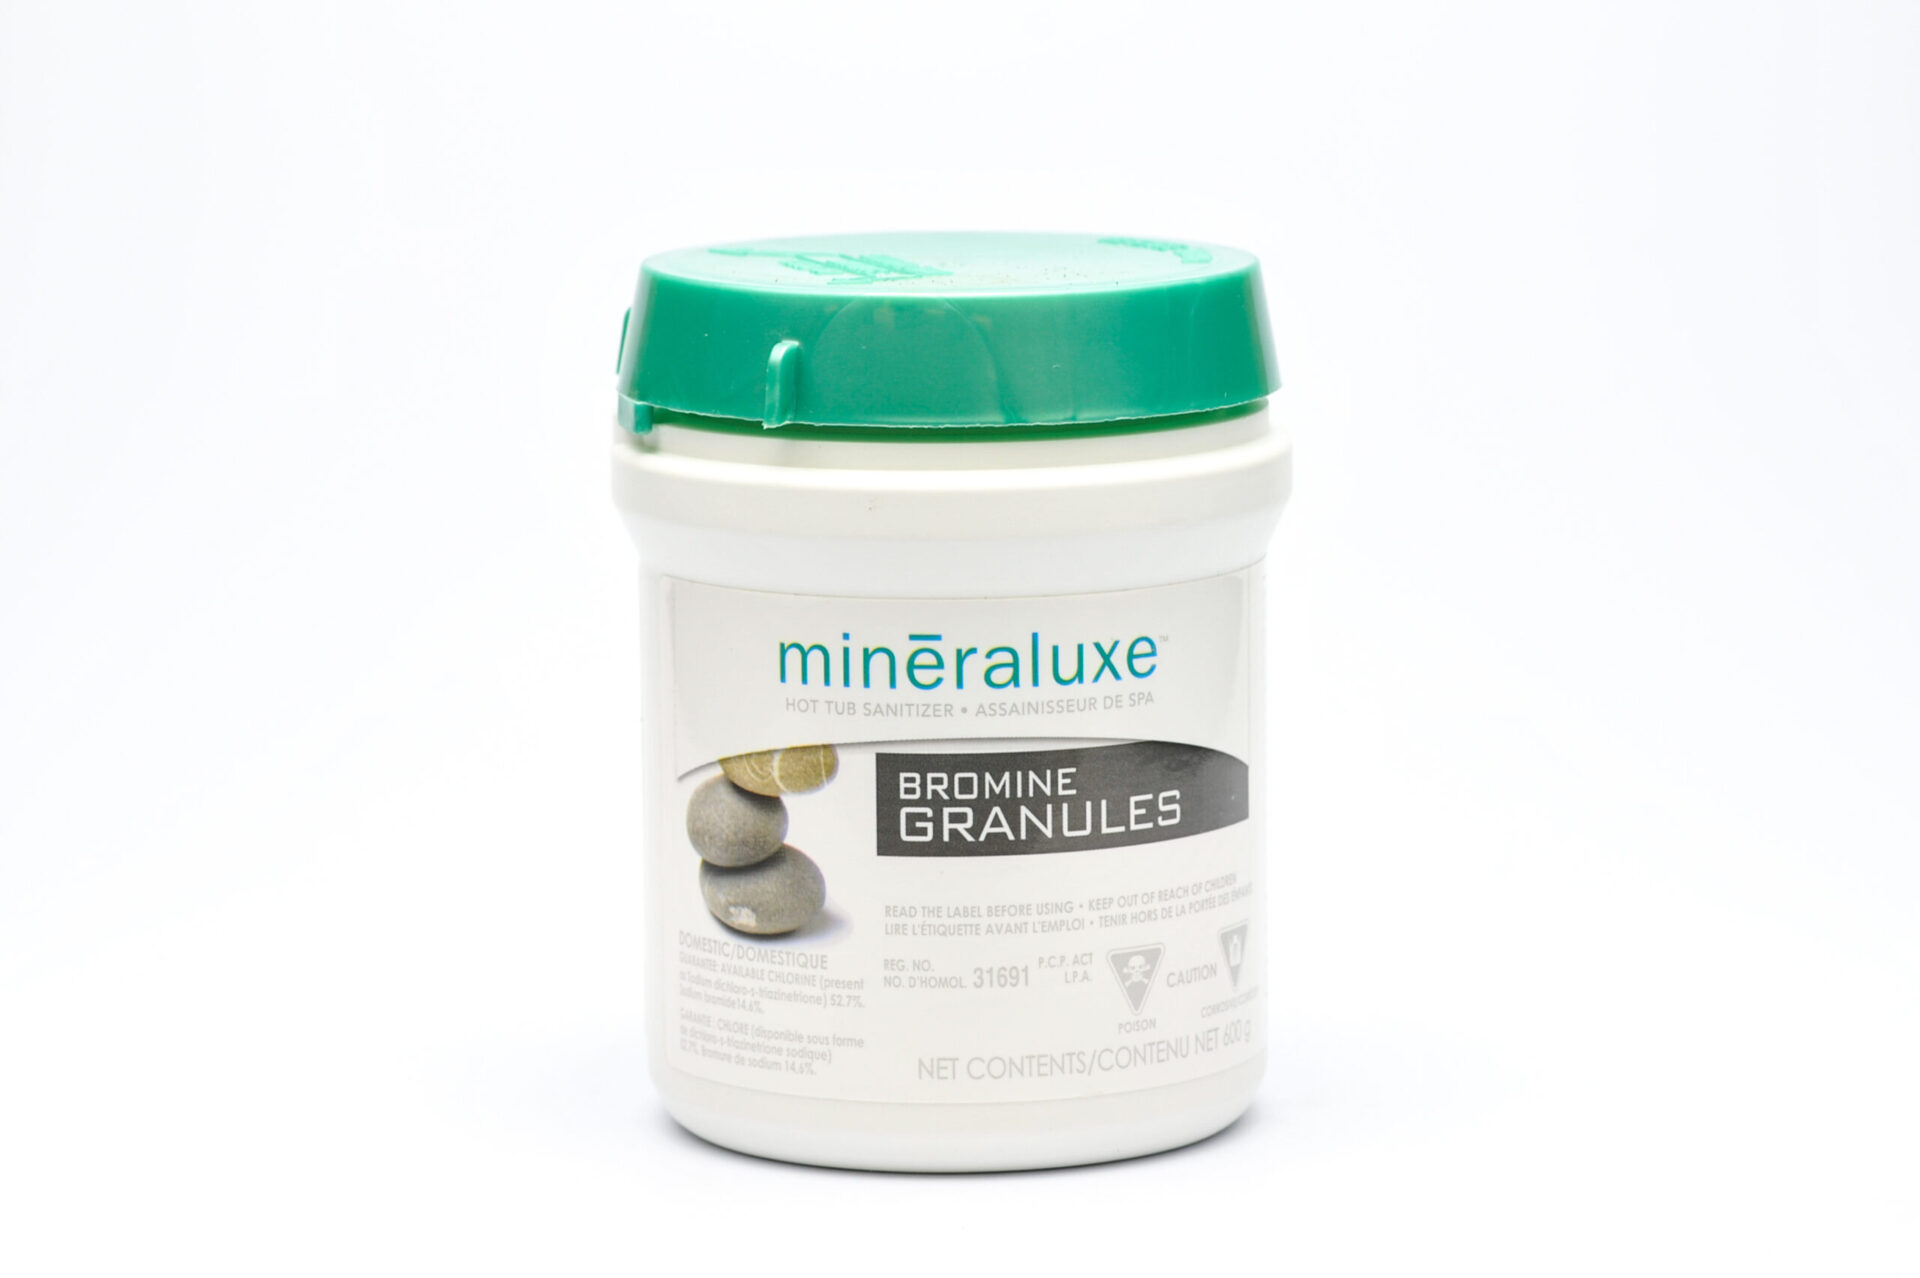 Mineraluxe Bromine Granules 600g scaled - Mineraluxe Bromine Granules 600g